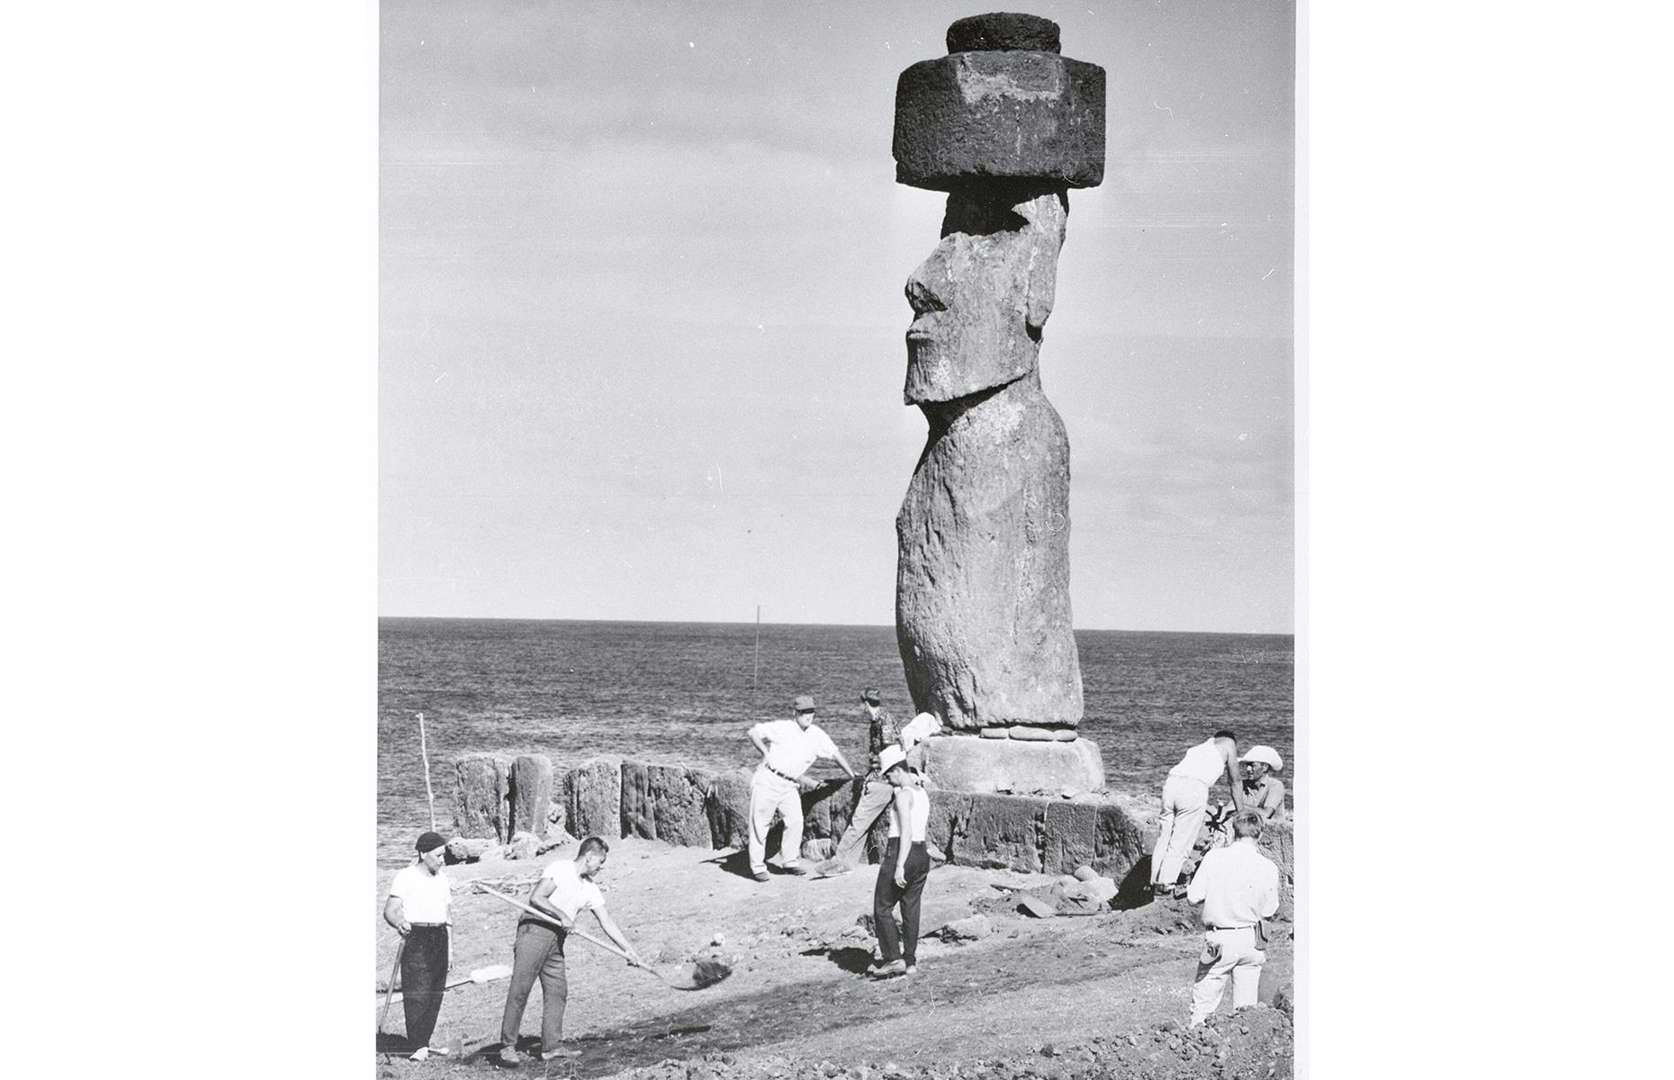 Slide 12 of 41: The carved human figures, or moai, scattered across Chile's Easter Island really have to be seen to be believed. The tallest among them soars to well over 30 feet (9m) and although it's not known exactly when these colossal busts were built, there's no doubt they've watched over the island for centuries. Extensive restoration projects were carried out in the mid-20th century – here archaeologists work on a towering moai circa 1969.